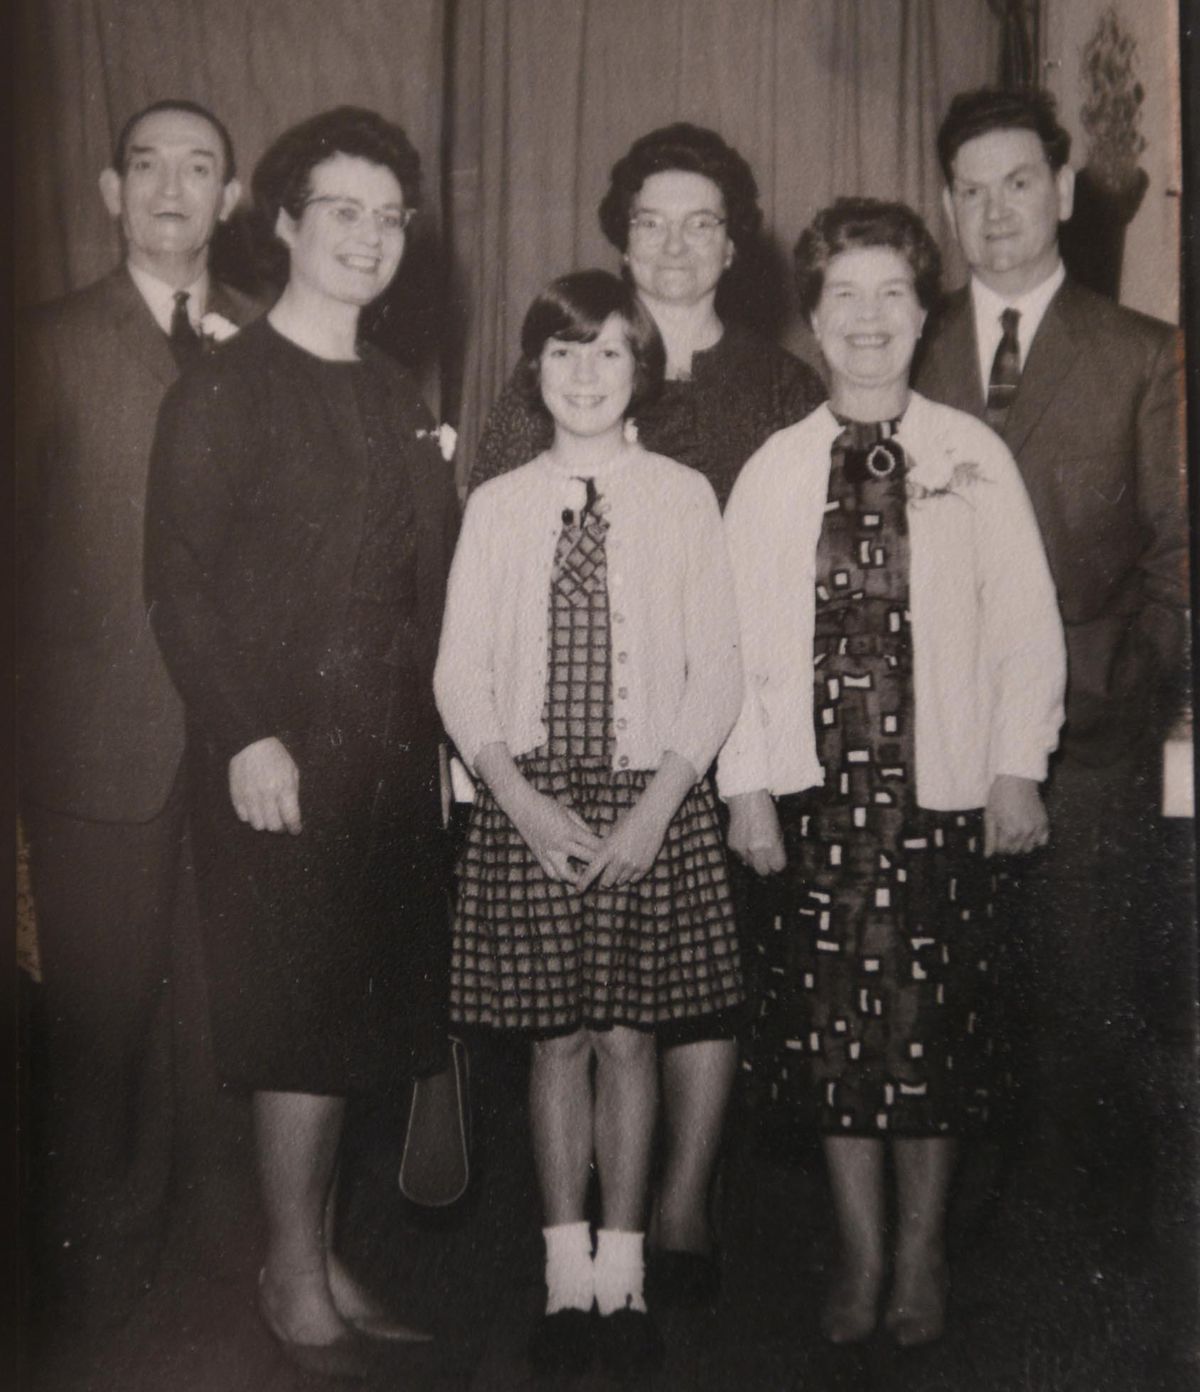 Gladys, front right, pictured in the 1960s